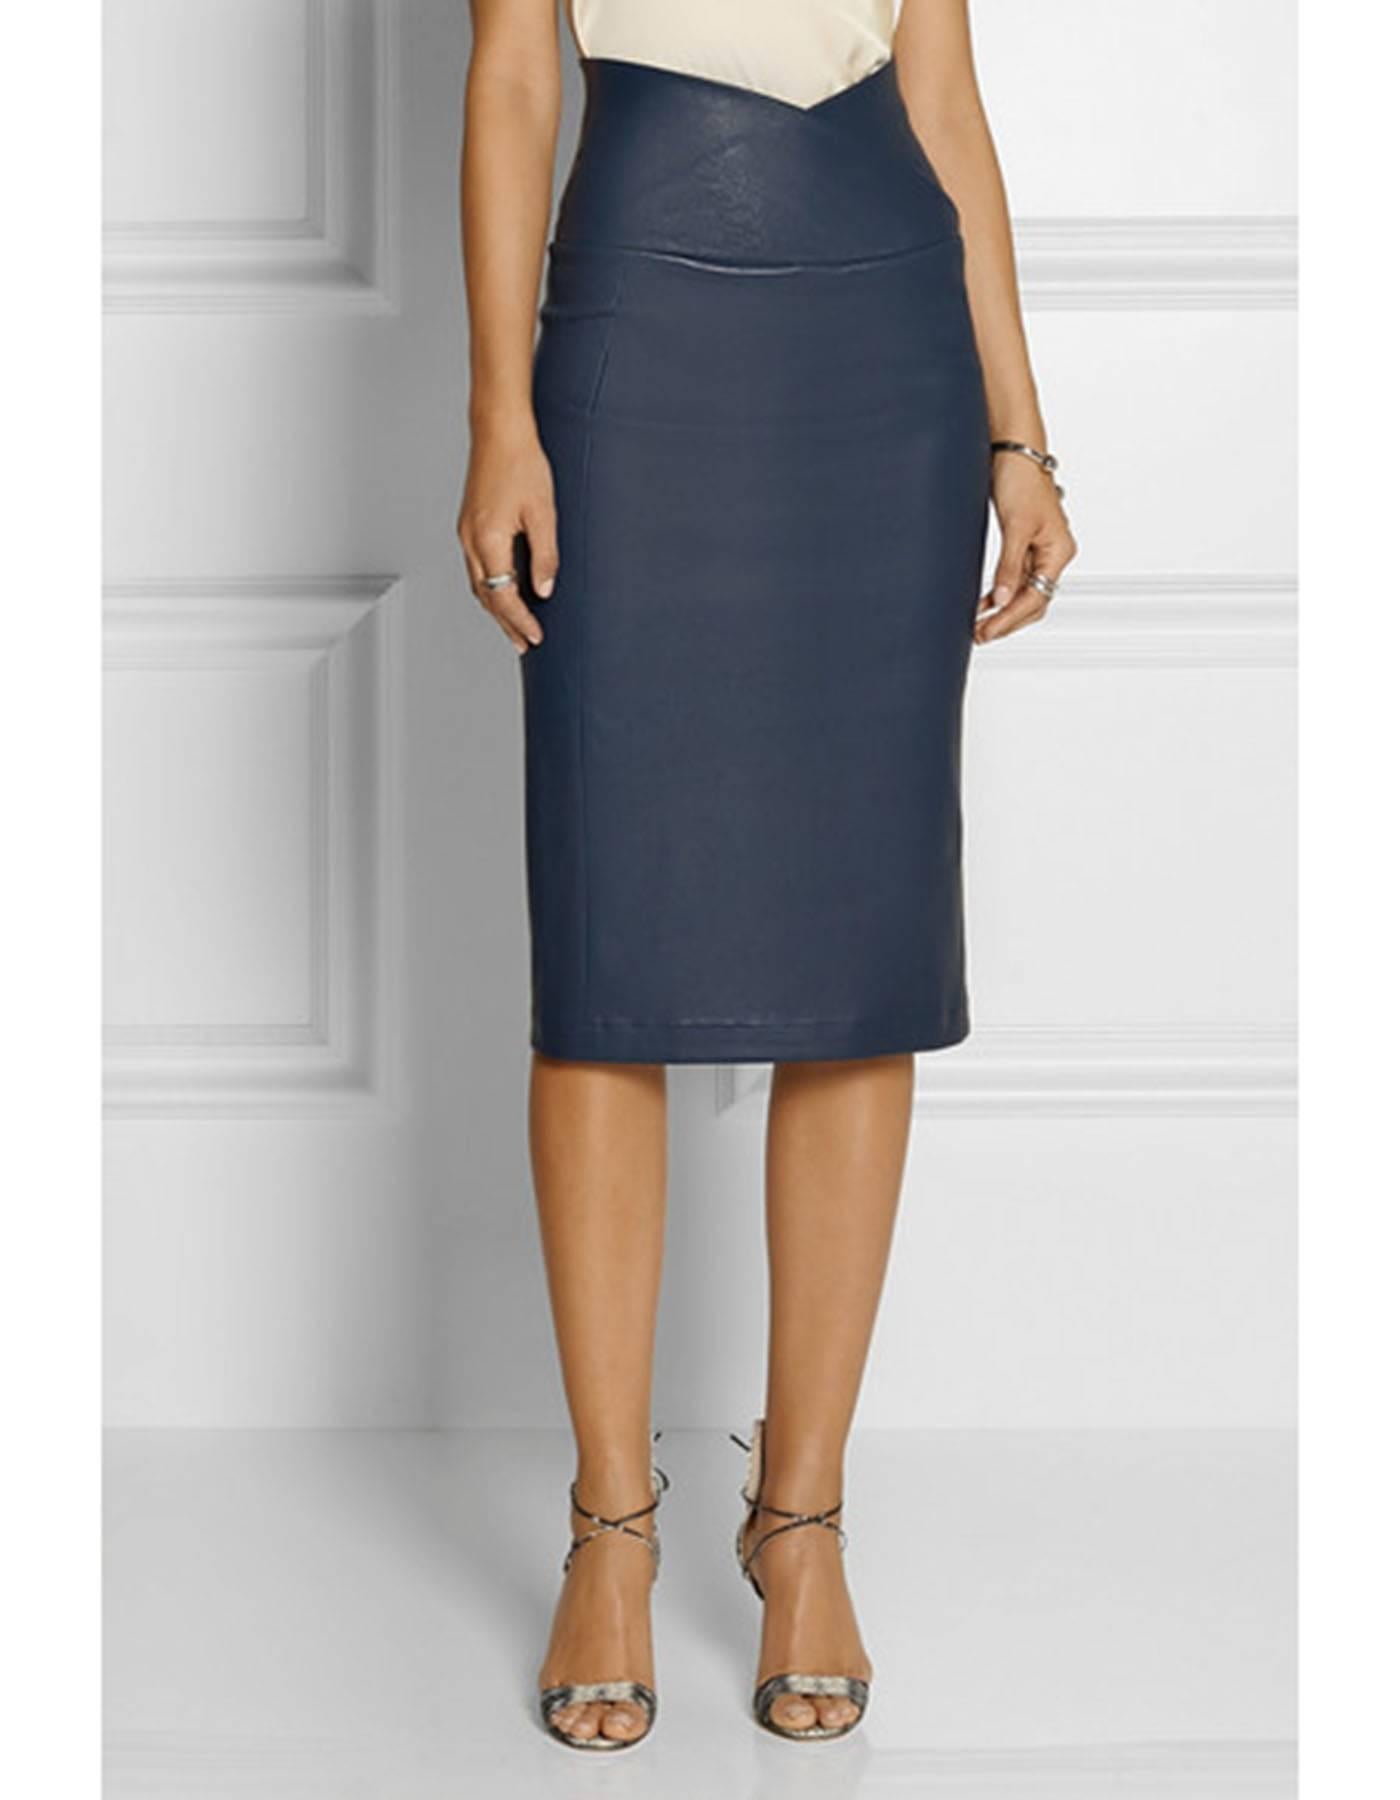 Zero + Maria Cornejo Navy Leather Nebi Skirt Sz 10 NWT

Made In: USA
Color: Navy
Composition: 100% Leather
Closure/Opening: Pull-up
Retail Price: $1,795 + tax
Overall Condition: Excellent pre-owned condition - NWT
Marked Size: US 10
Waist: 28